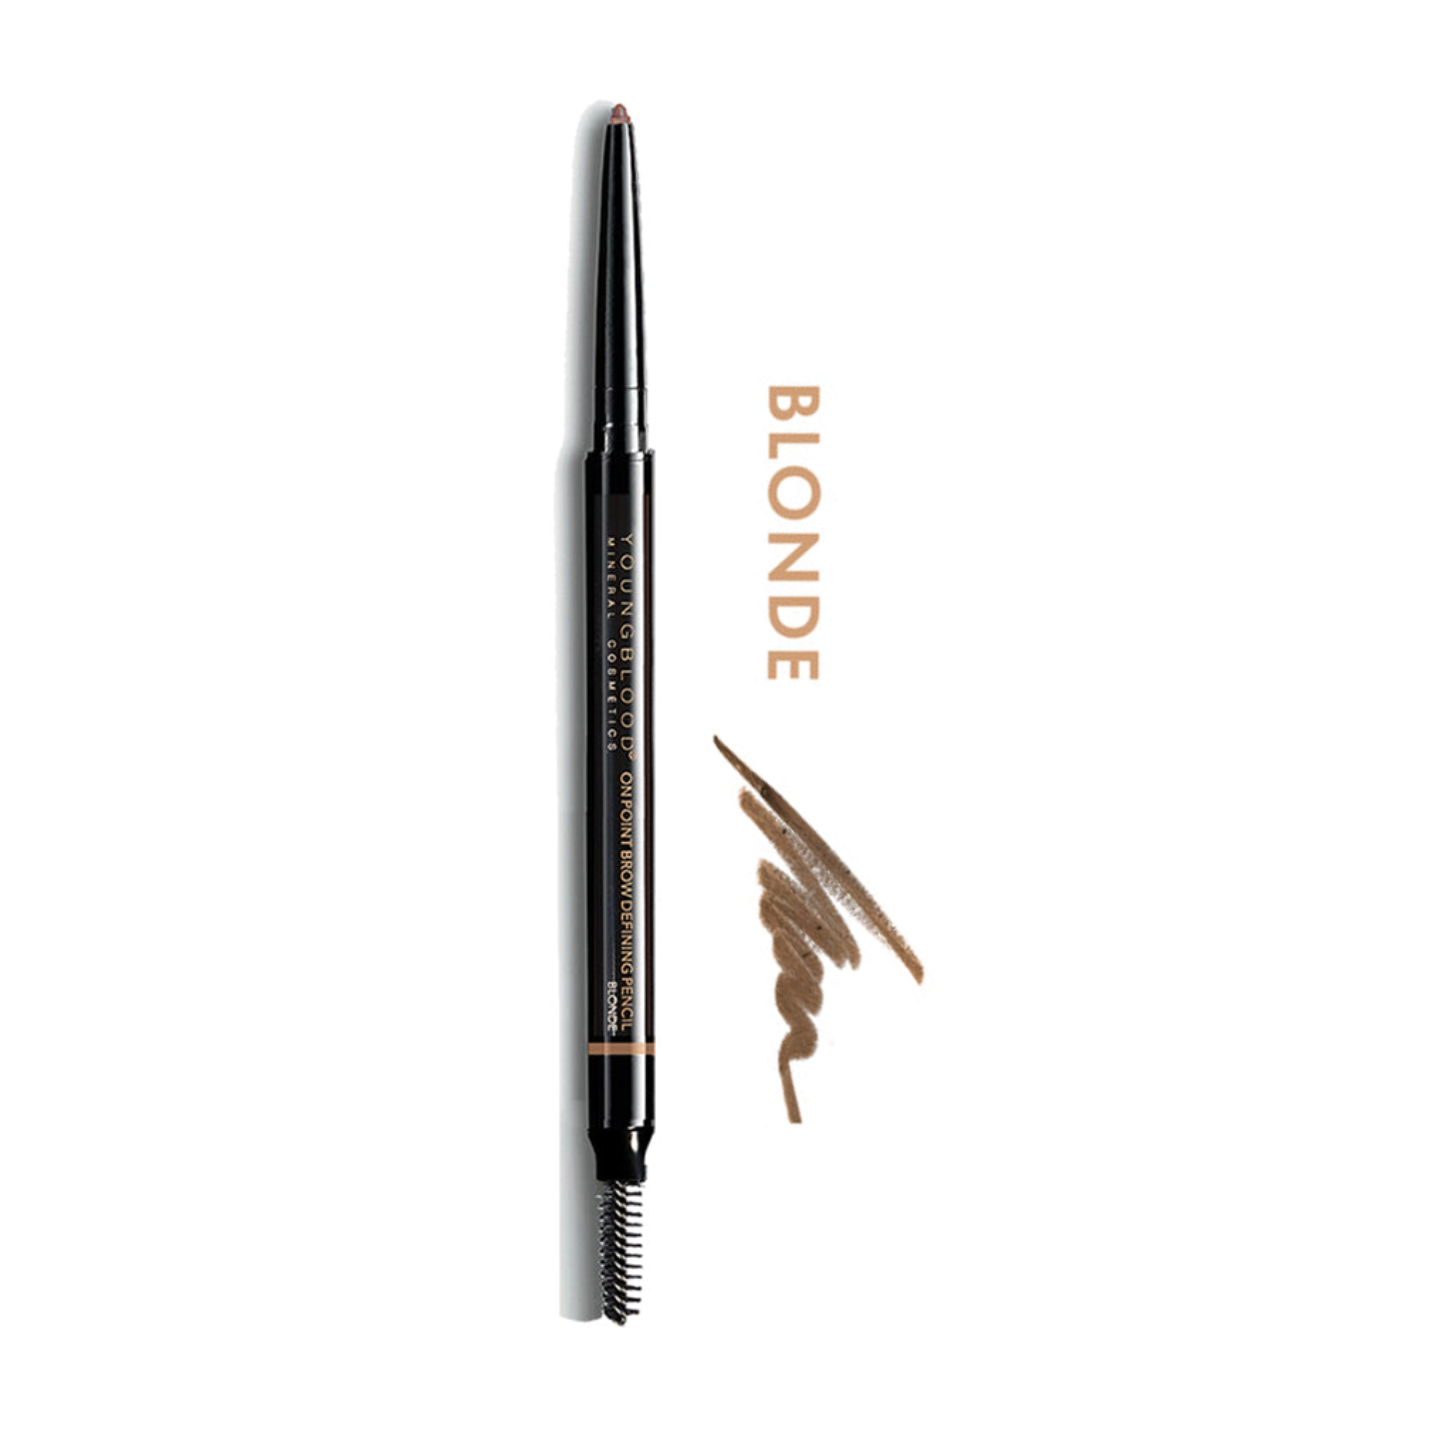 Youngblood On Point Brow Defining Pencil 0.35g - Blonde